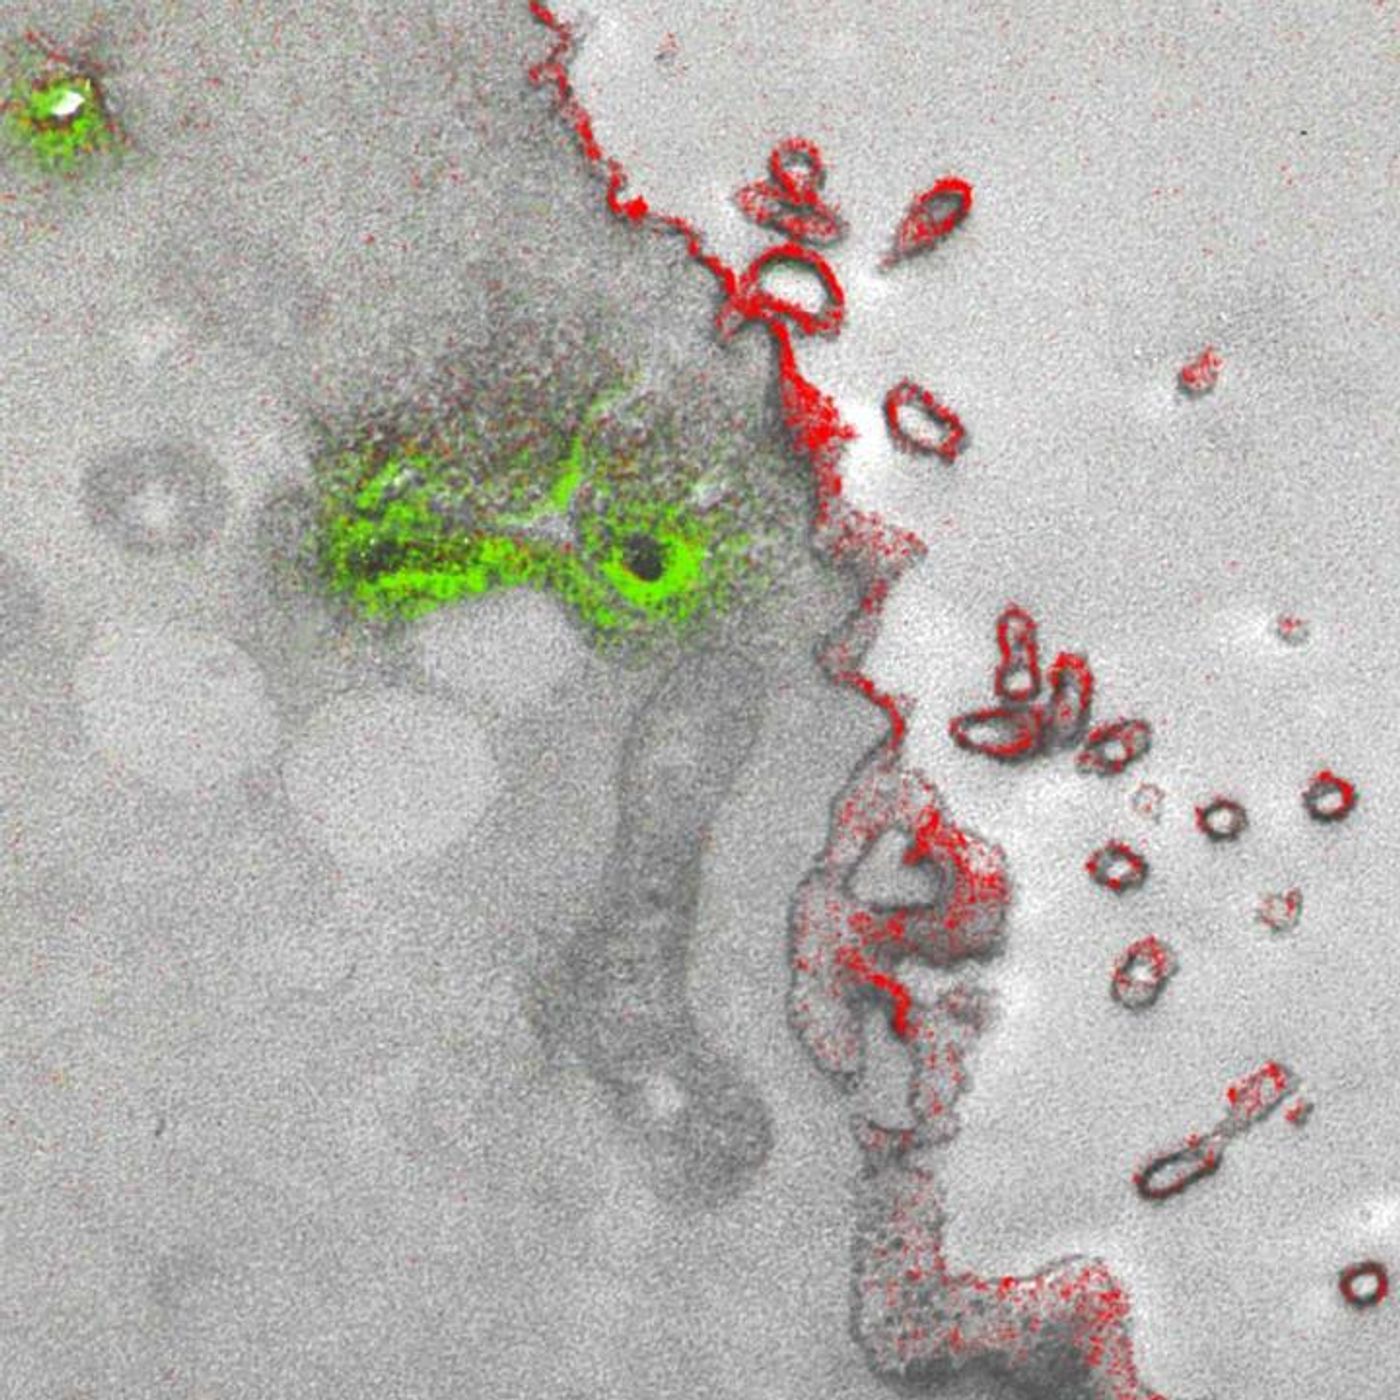 Two-color merge of the elemental maps (La in green and Ce in red), overlaid on the conventional electron microscopy image of Golgi and Plasma Membrane in Tissue Culture Cells. / Credit: Adams et al./Cell Chemical Biology 2016